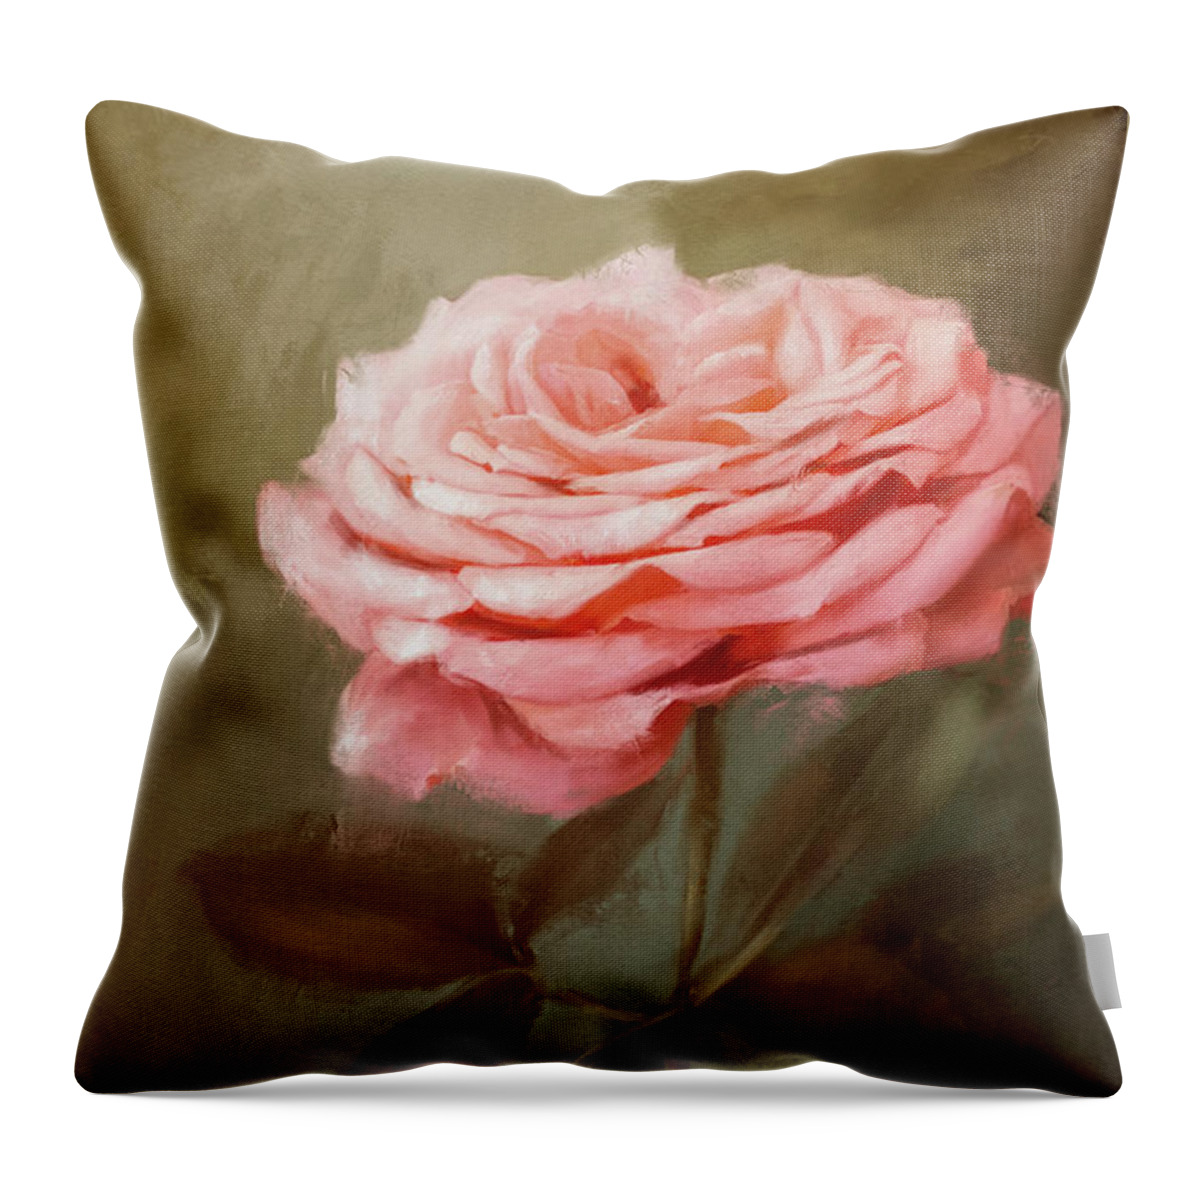 Flower Throw Pillow featuring the painting Portrait Of The Salmon Rose by Jai Johnson